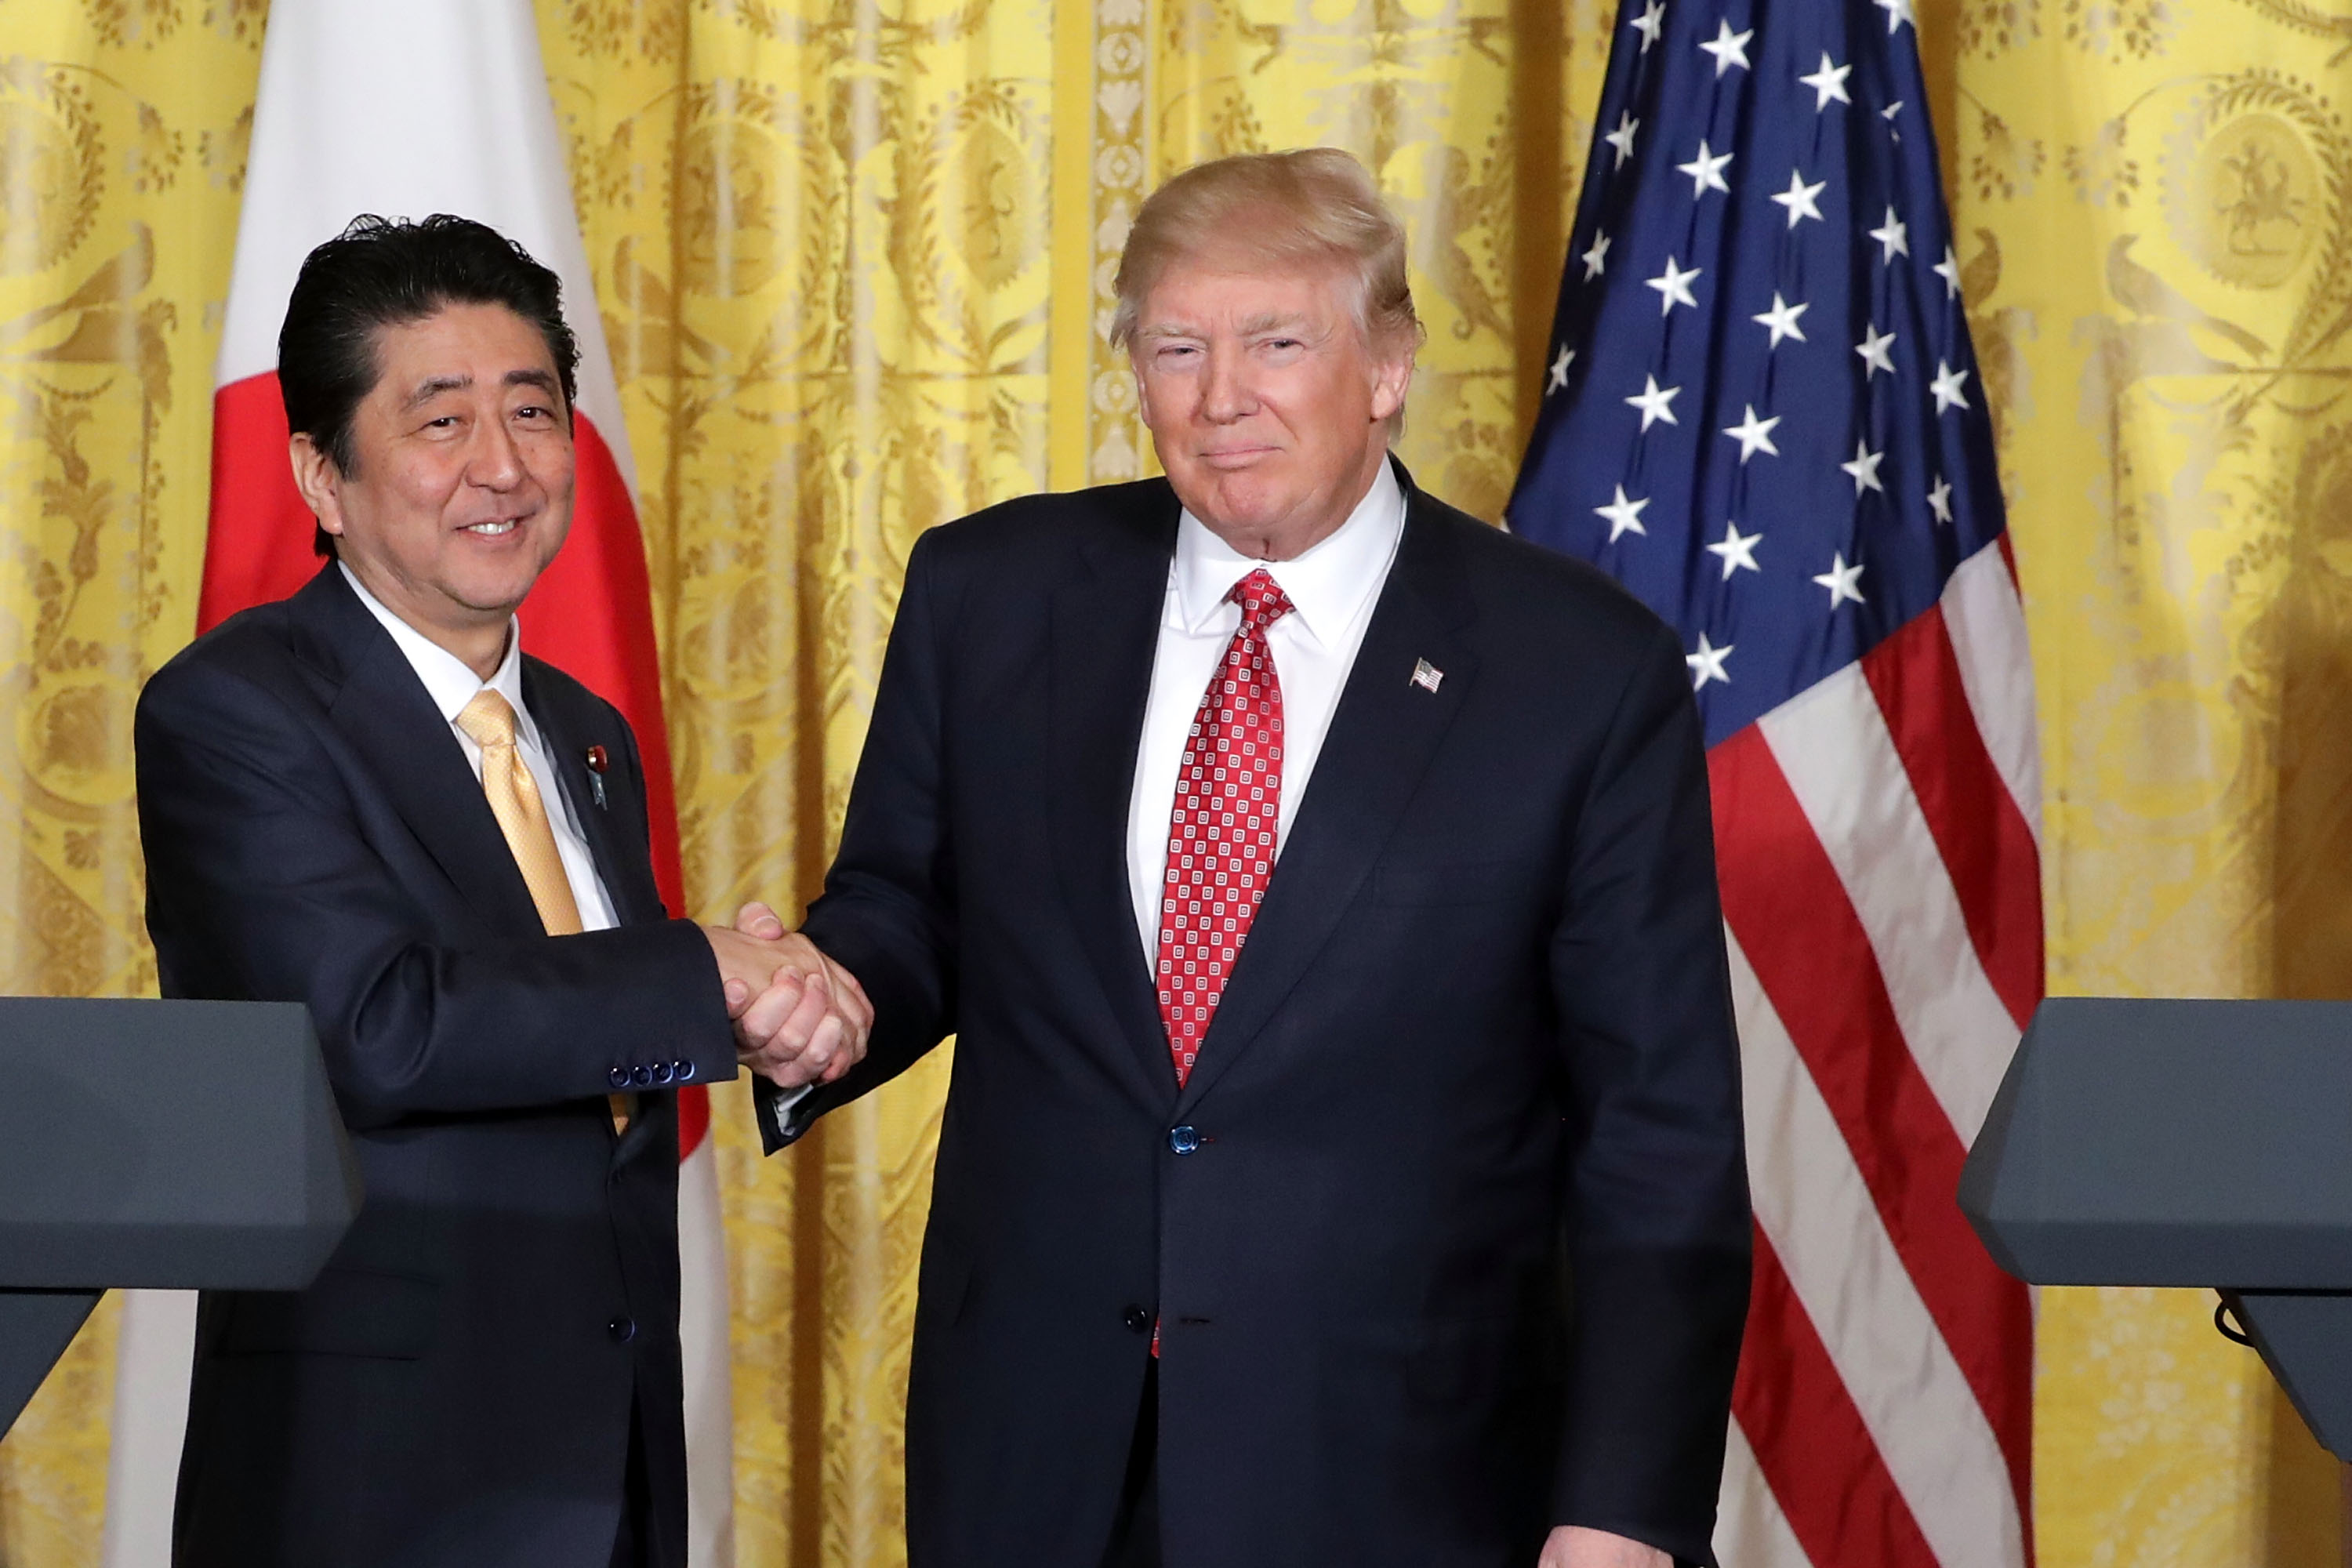 U.S. President Donald Trump and Japanese Prime Minister Shinzo Abe shake hands at the conclusion of a joint news conference in the East Room at the White House February 10, 2017 in Washington, DC. (Chip Somodevilla—Getty Images)